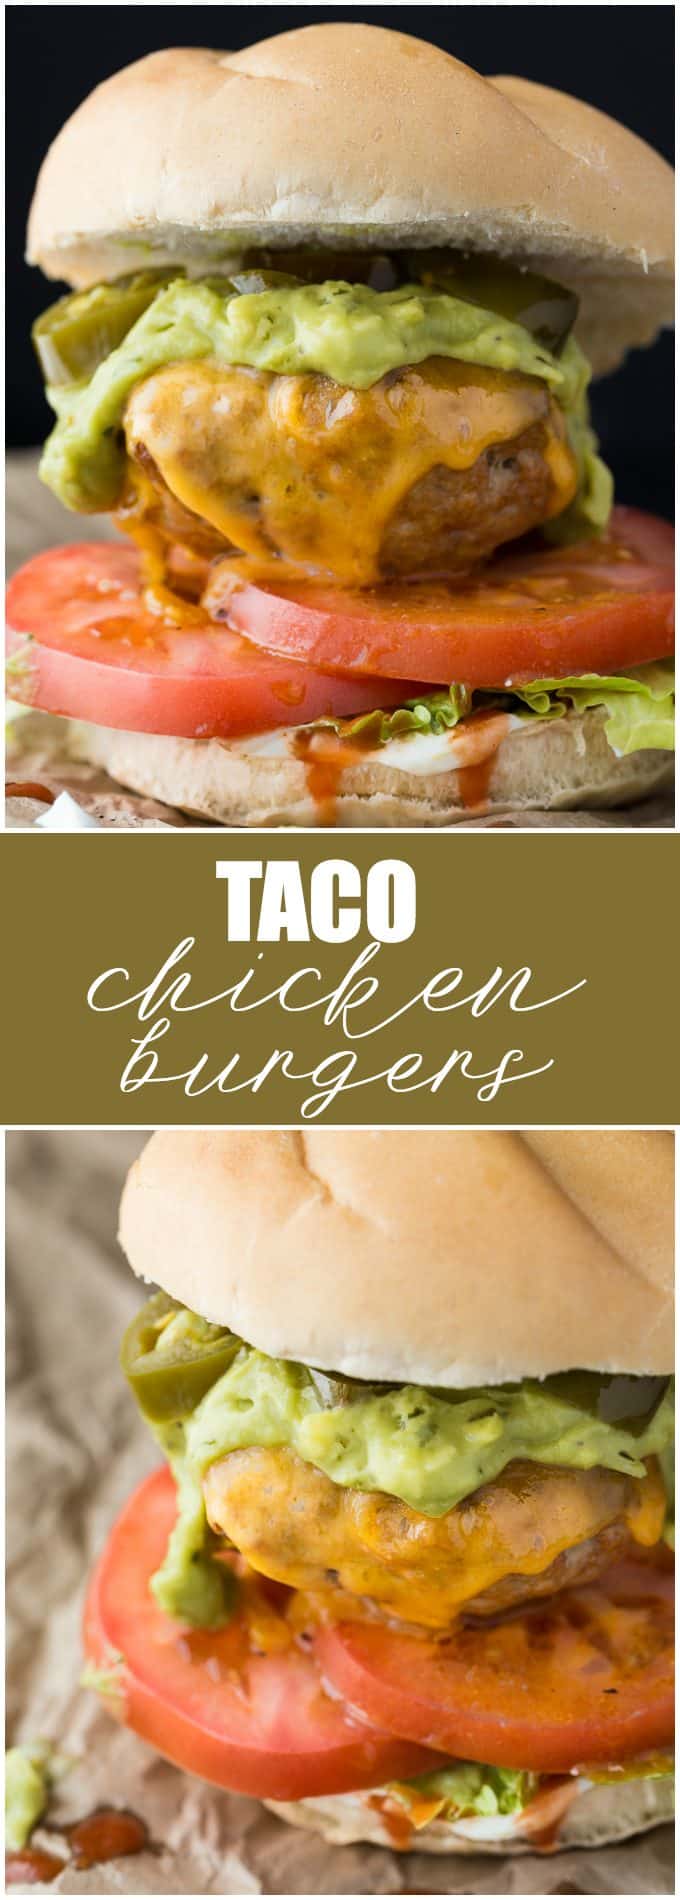 Taco Chicken Burgers - Switch it up for Mexican night! These healthier oven-baked chicken burgers are made with taco seasoning and topped with guacamole, jalapenos, and of course, cheese.